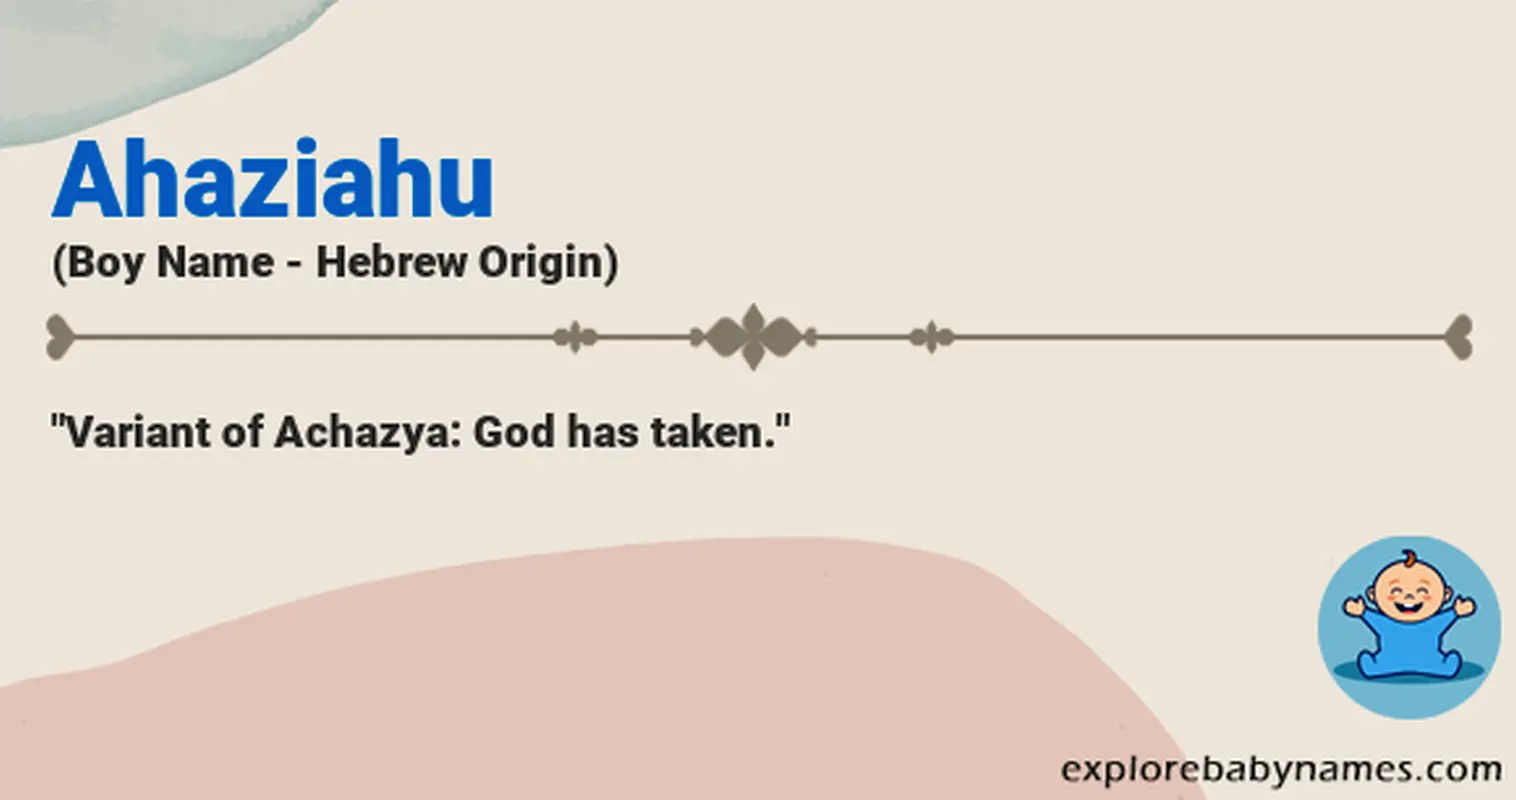 Meaning of Ahaziahu